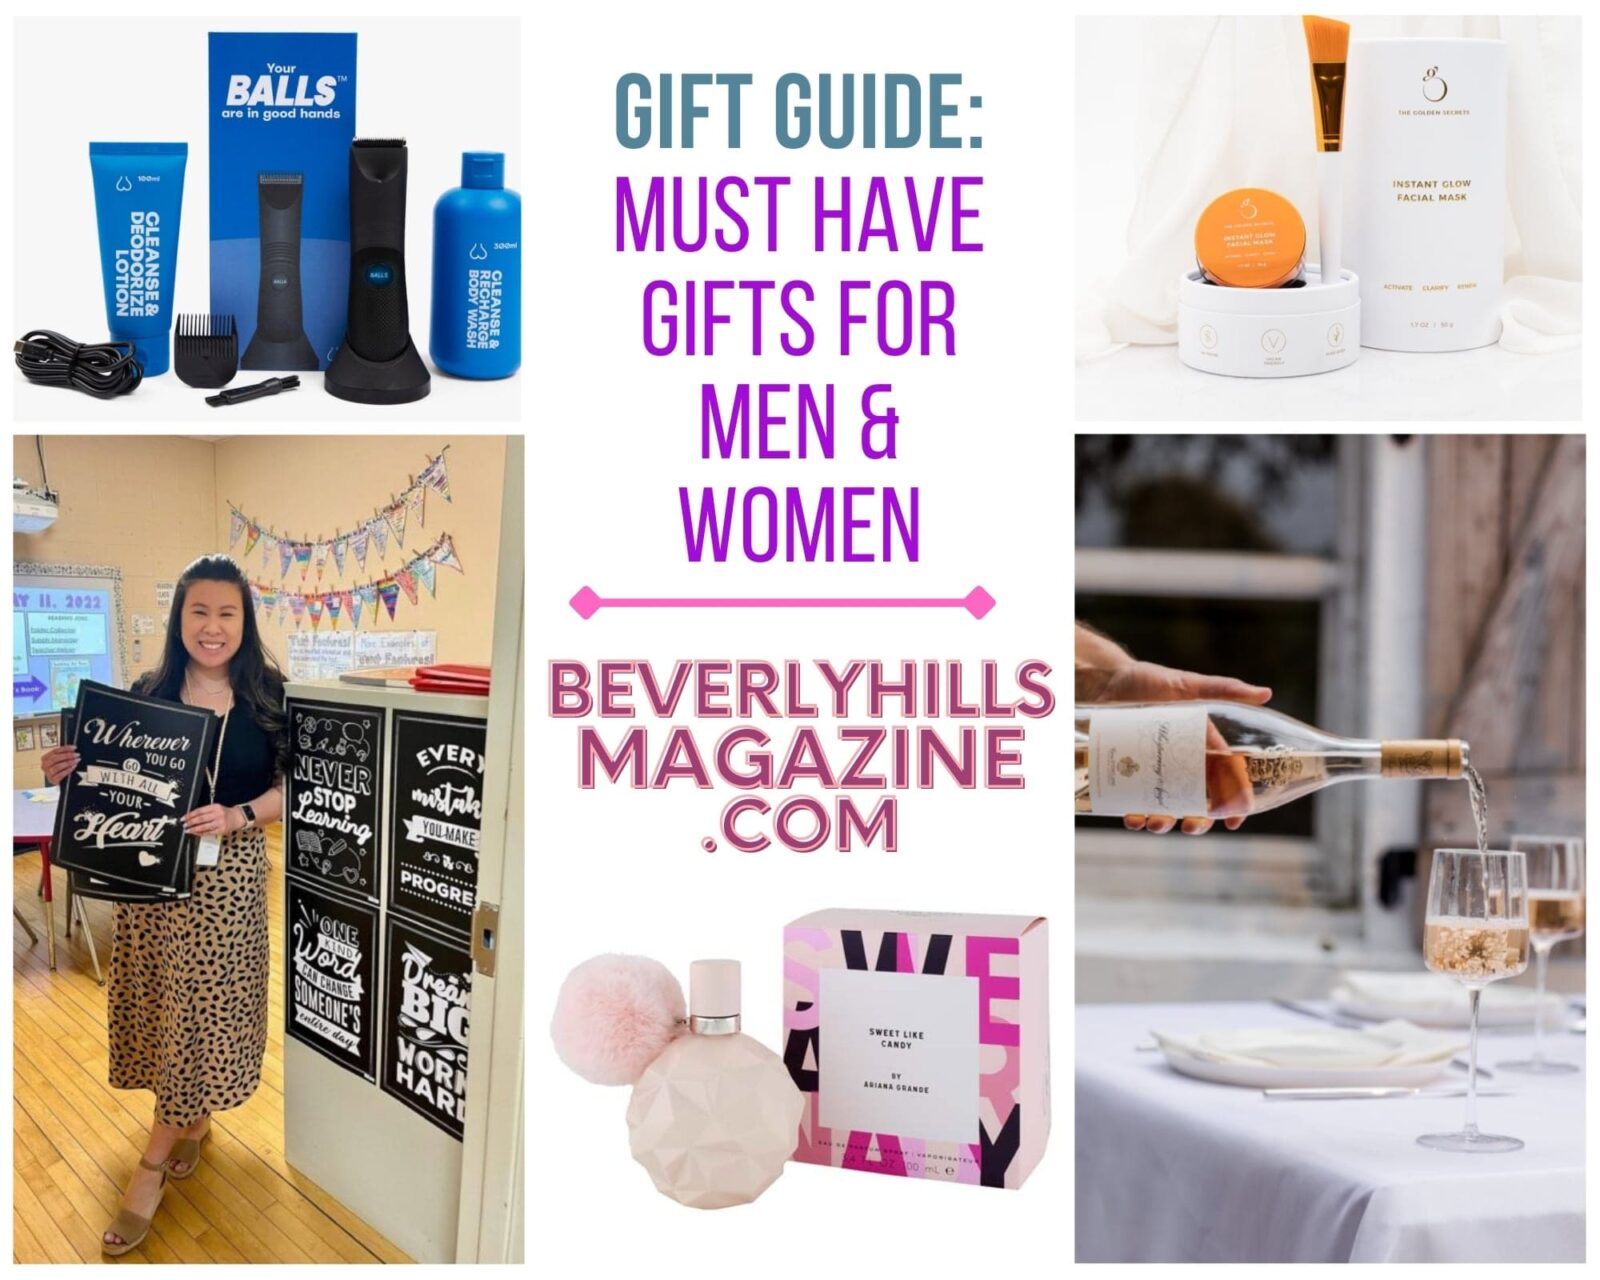 Gift Guide Must Have Gifts for Men and Women Beverly Hills Magazine #giftguide #gifts #musthaves #bevhillsmag #beverlyhillsmagazine #beverlyhills